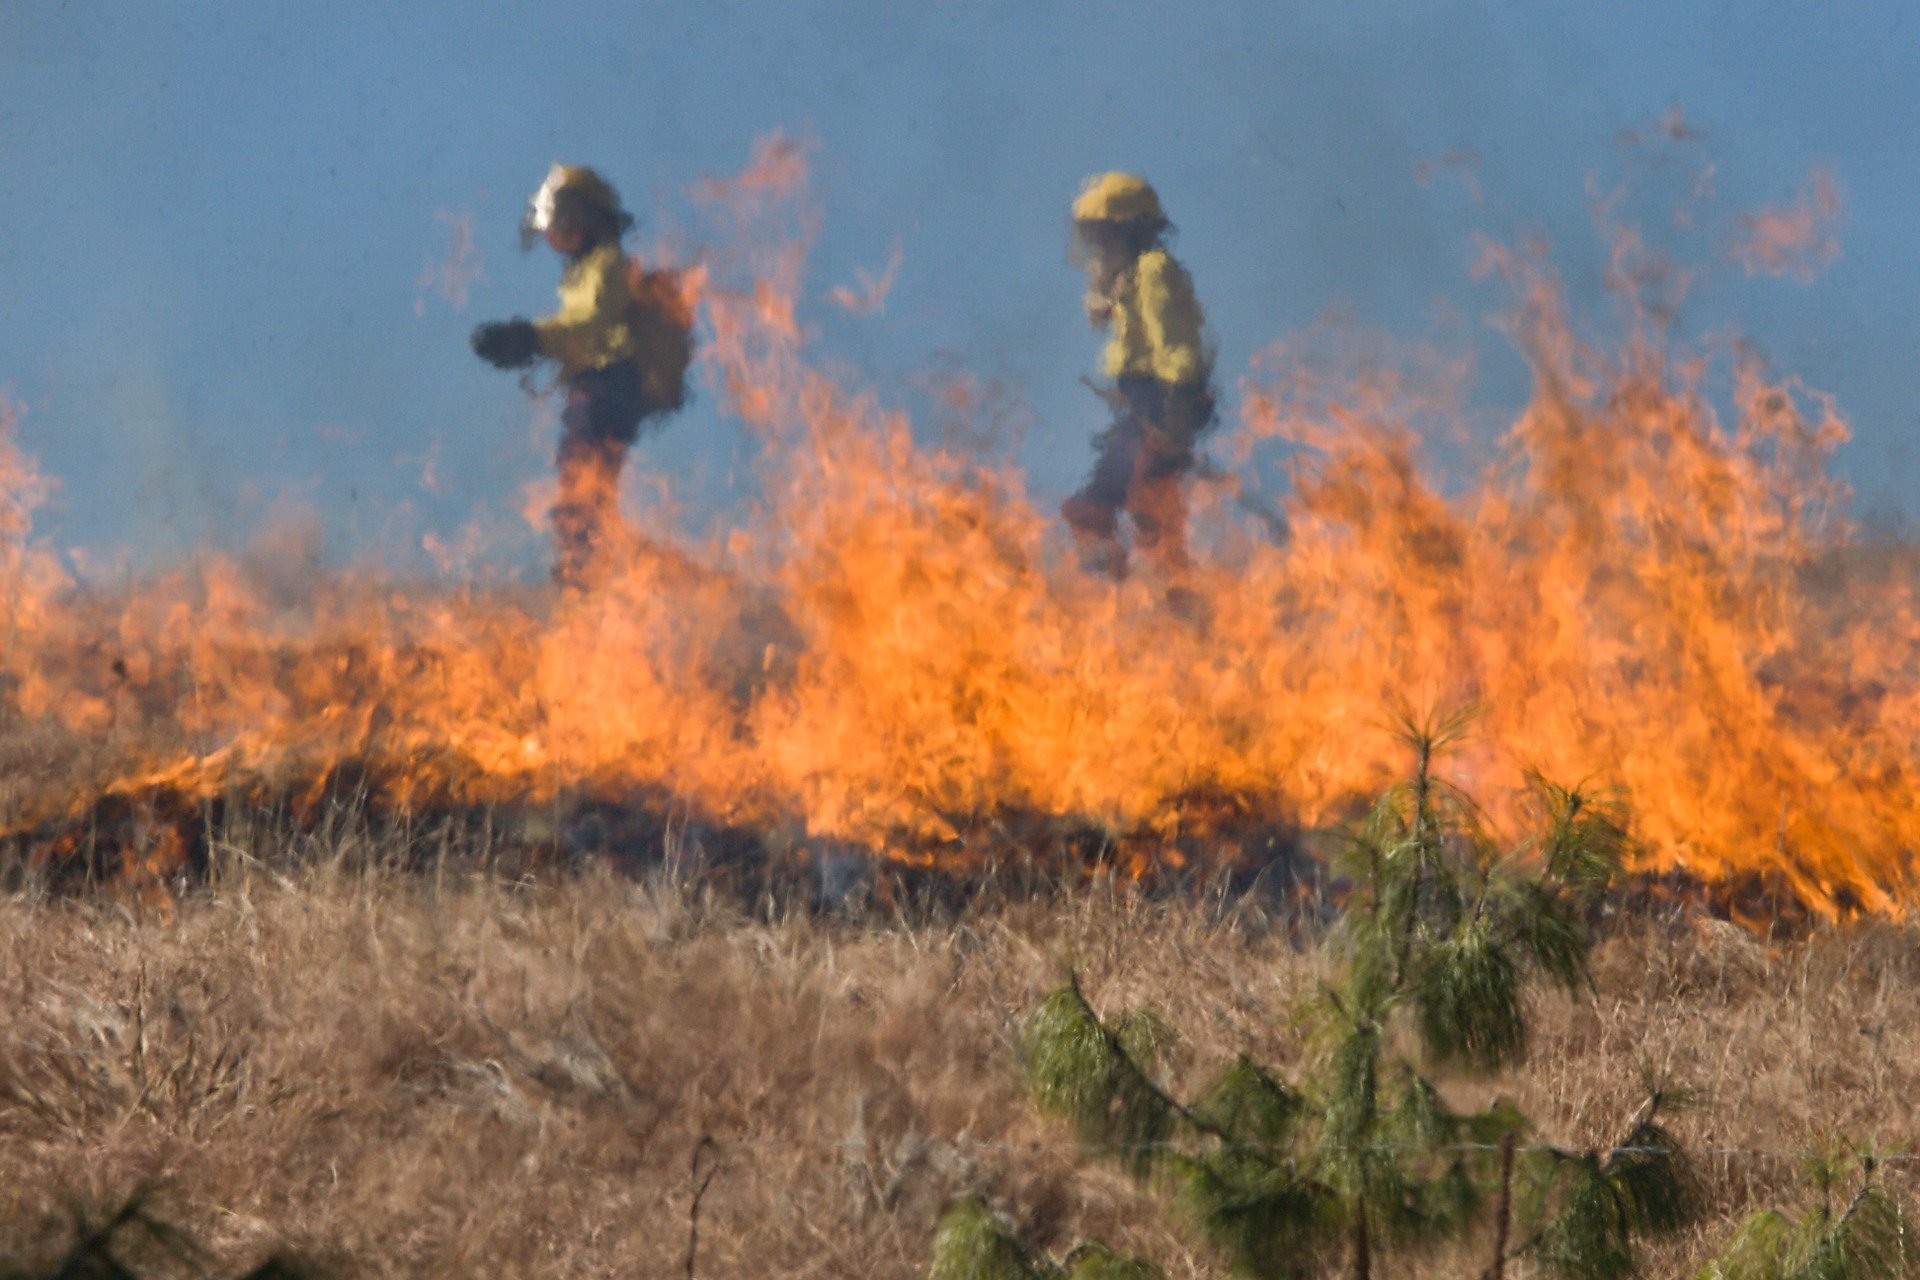 With the EUPHEME project, Prof. Stott is linking extreme heatwaves and resulting wildfires to climate change.